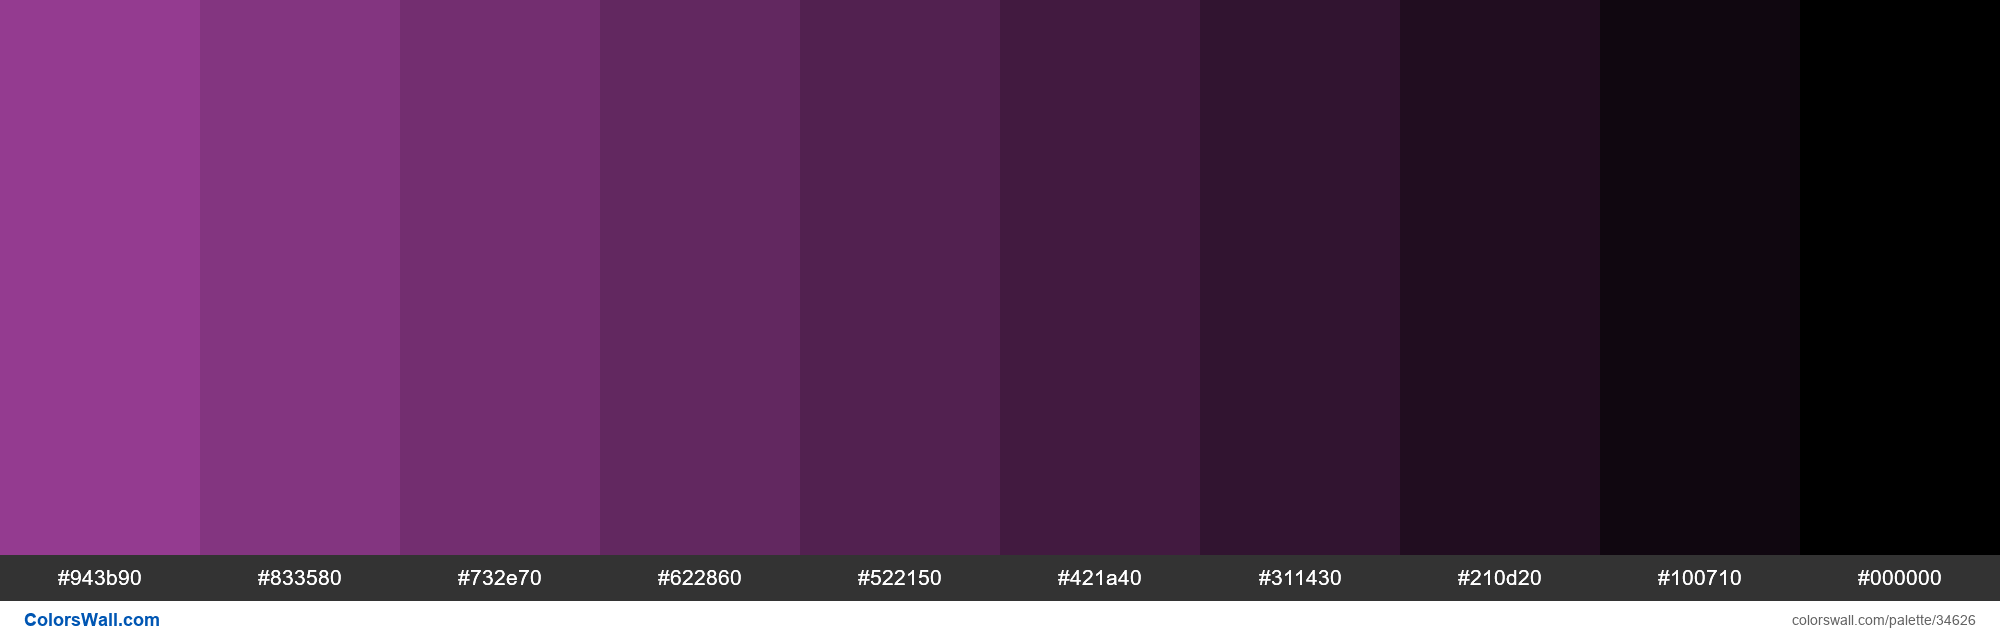 Shades Xkcd Color Ugly Purple A442a0 Hex 34626 Colorswall 